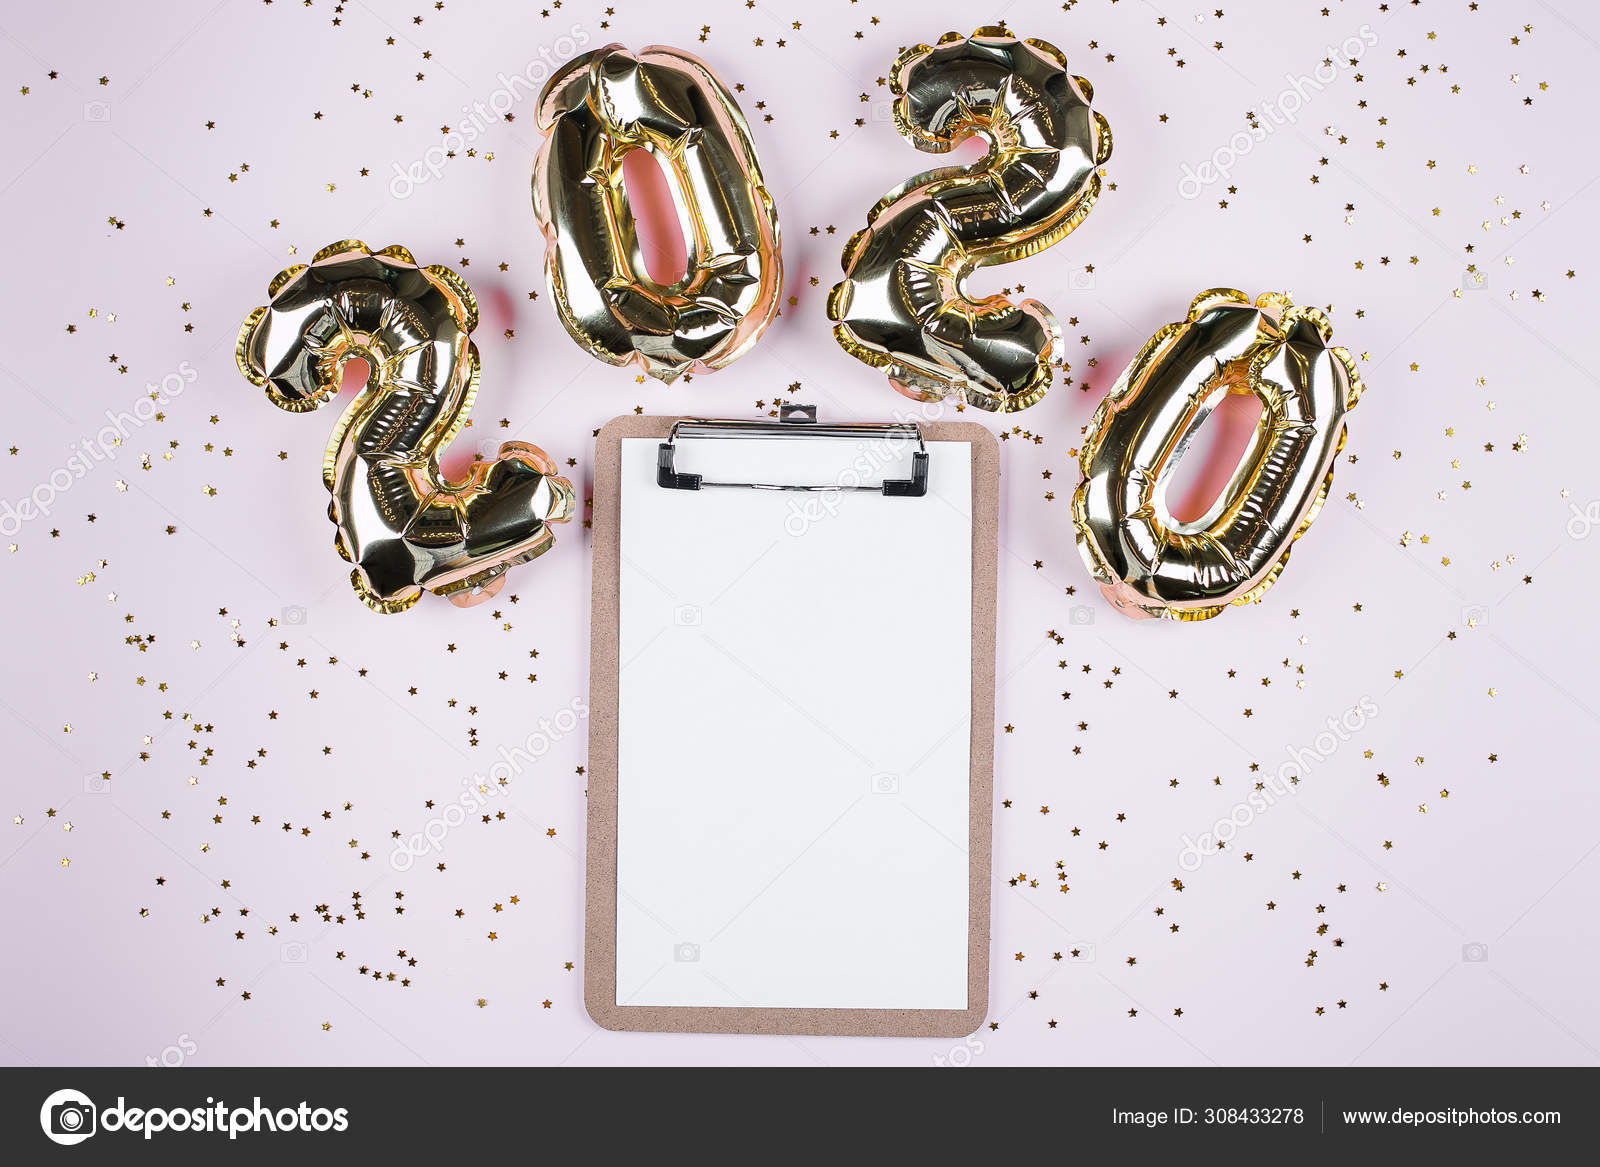 Download Happy New Year 2020 Number 2020 Gold Balloon Mockup Concept Stock Photo Image By C Anikonaann 308433278